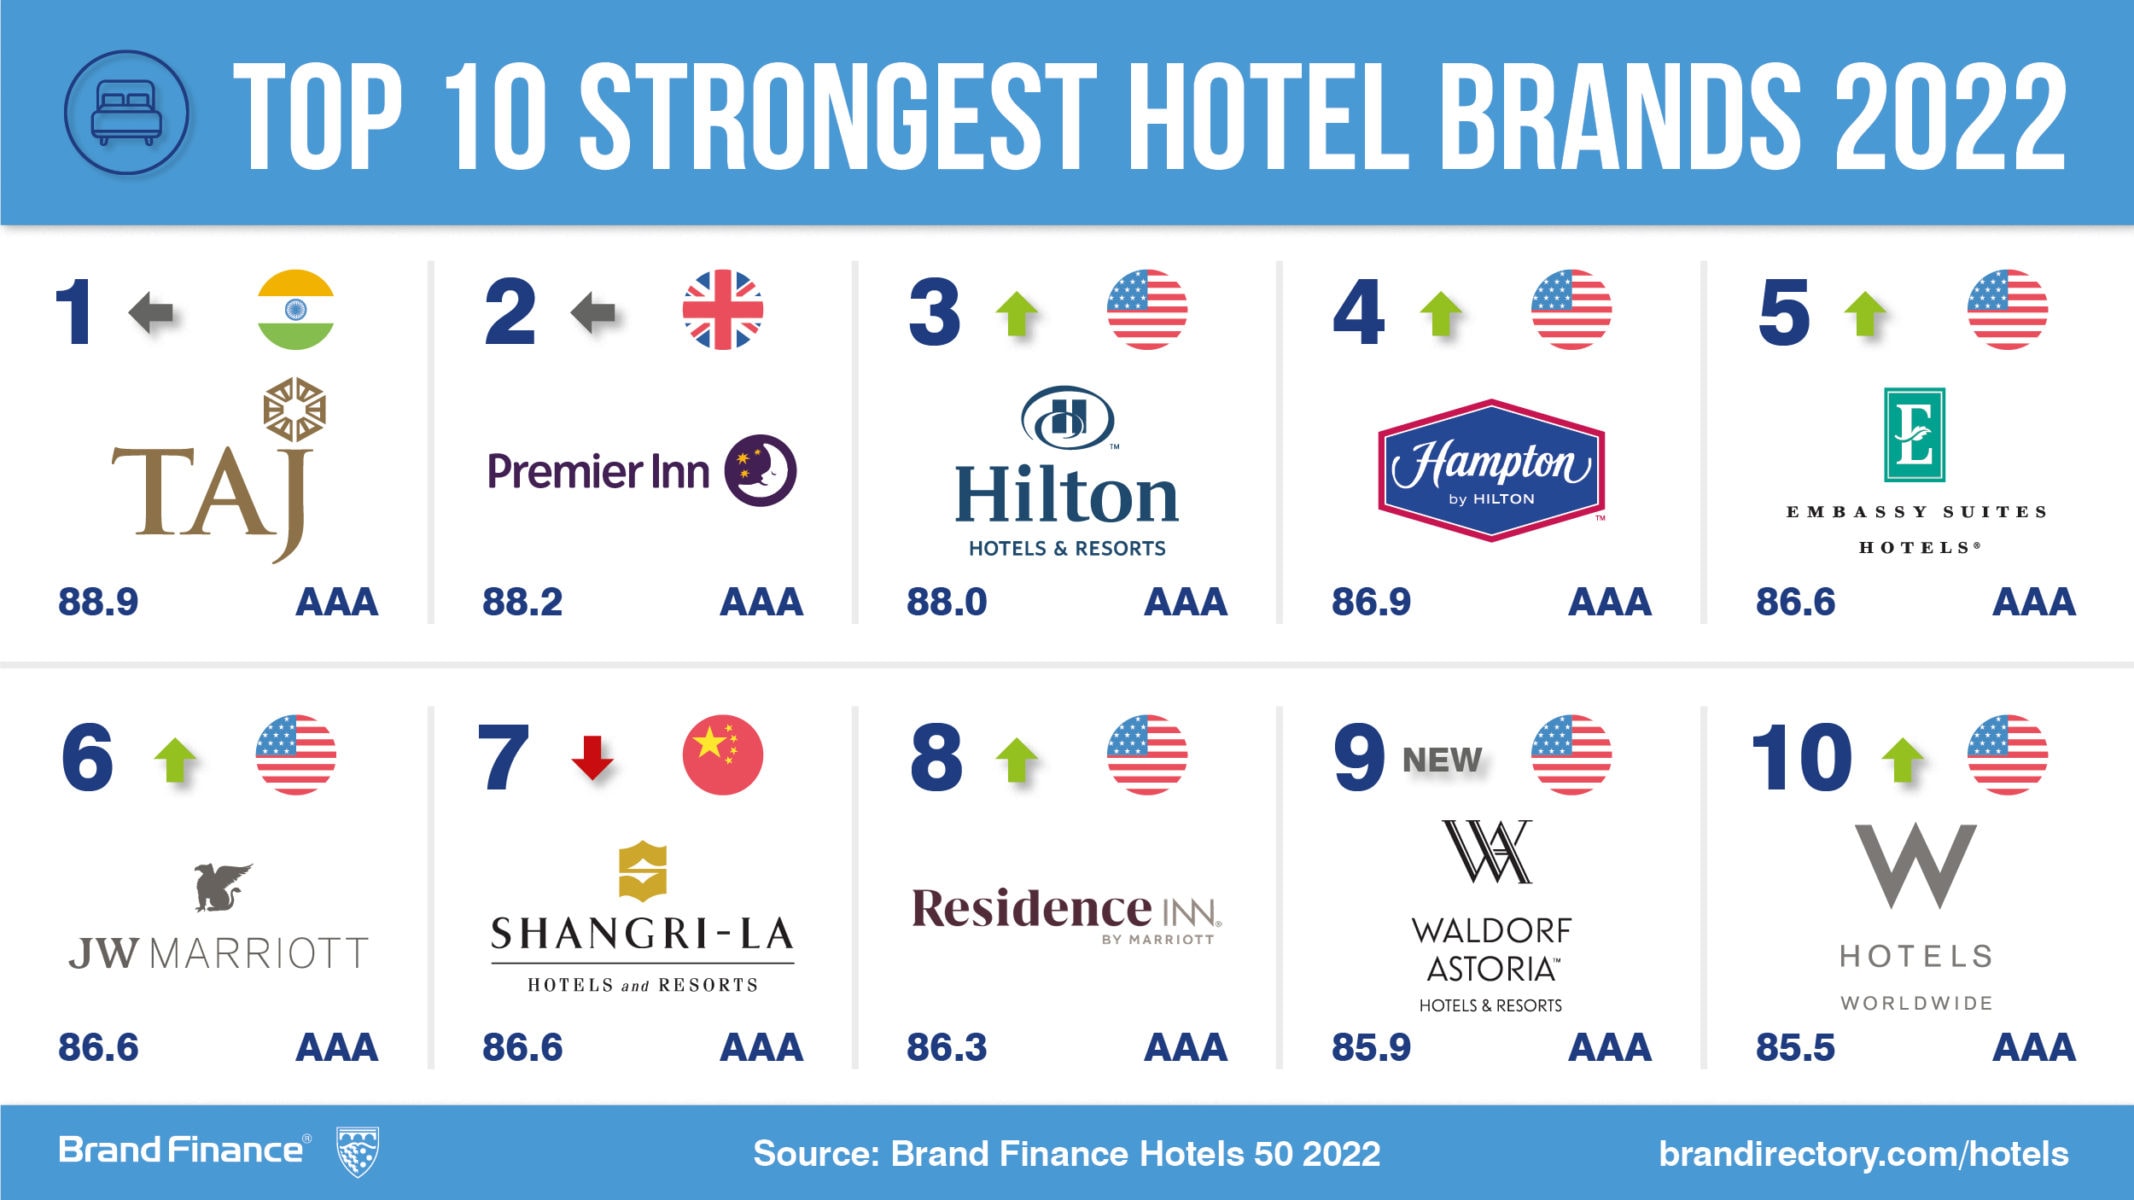 Hilton brand value leaps ahead to retain top position, while most hotel